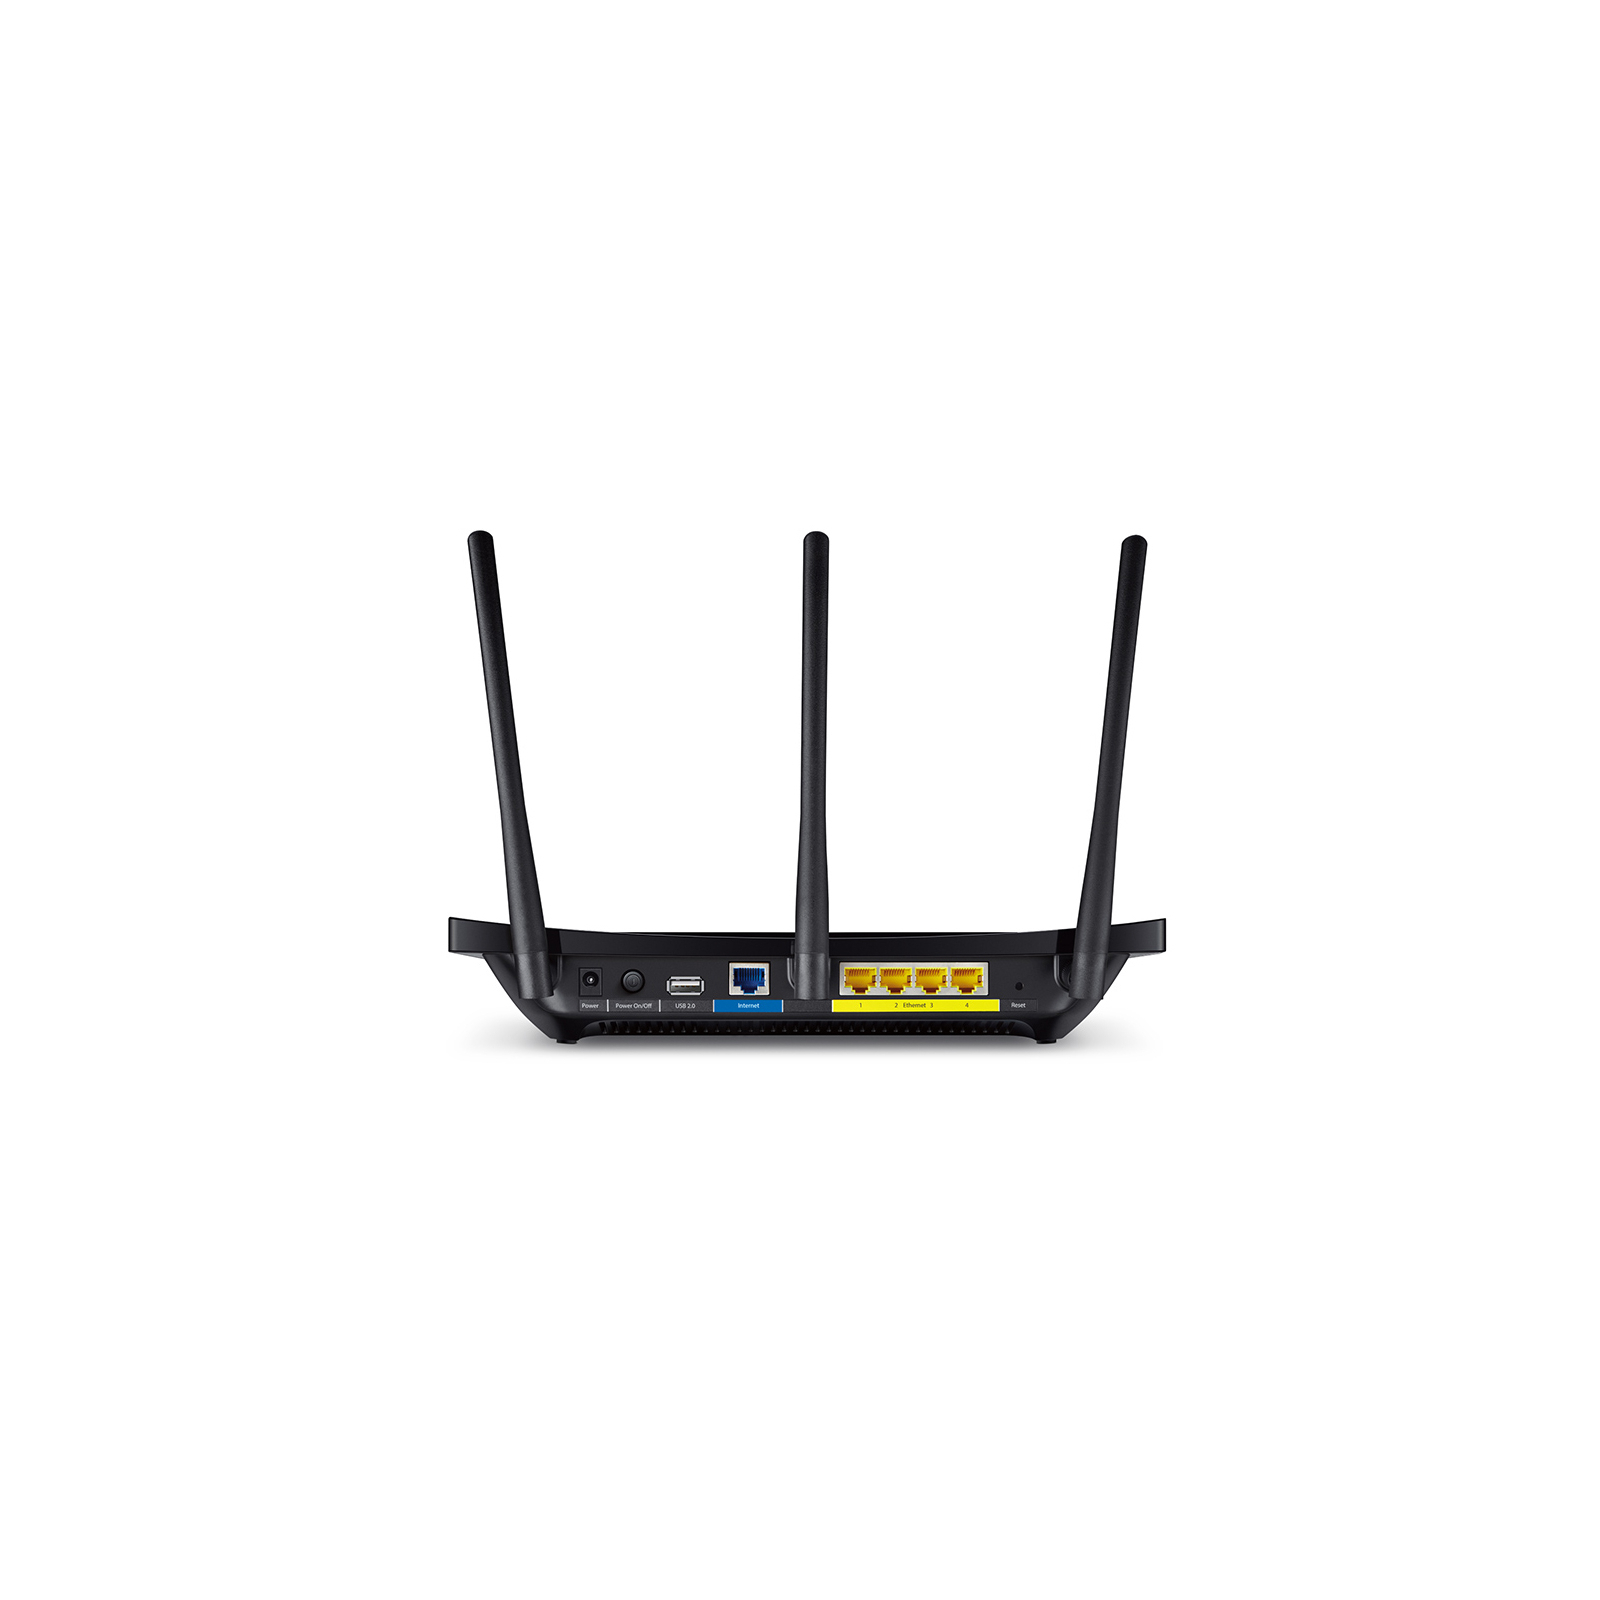 Маршрутизатор TP-Link Touch P5 изображение 4